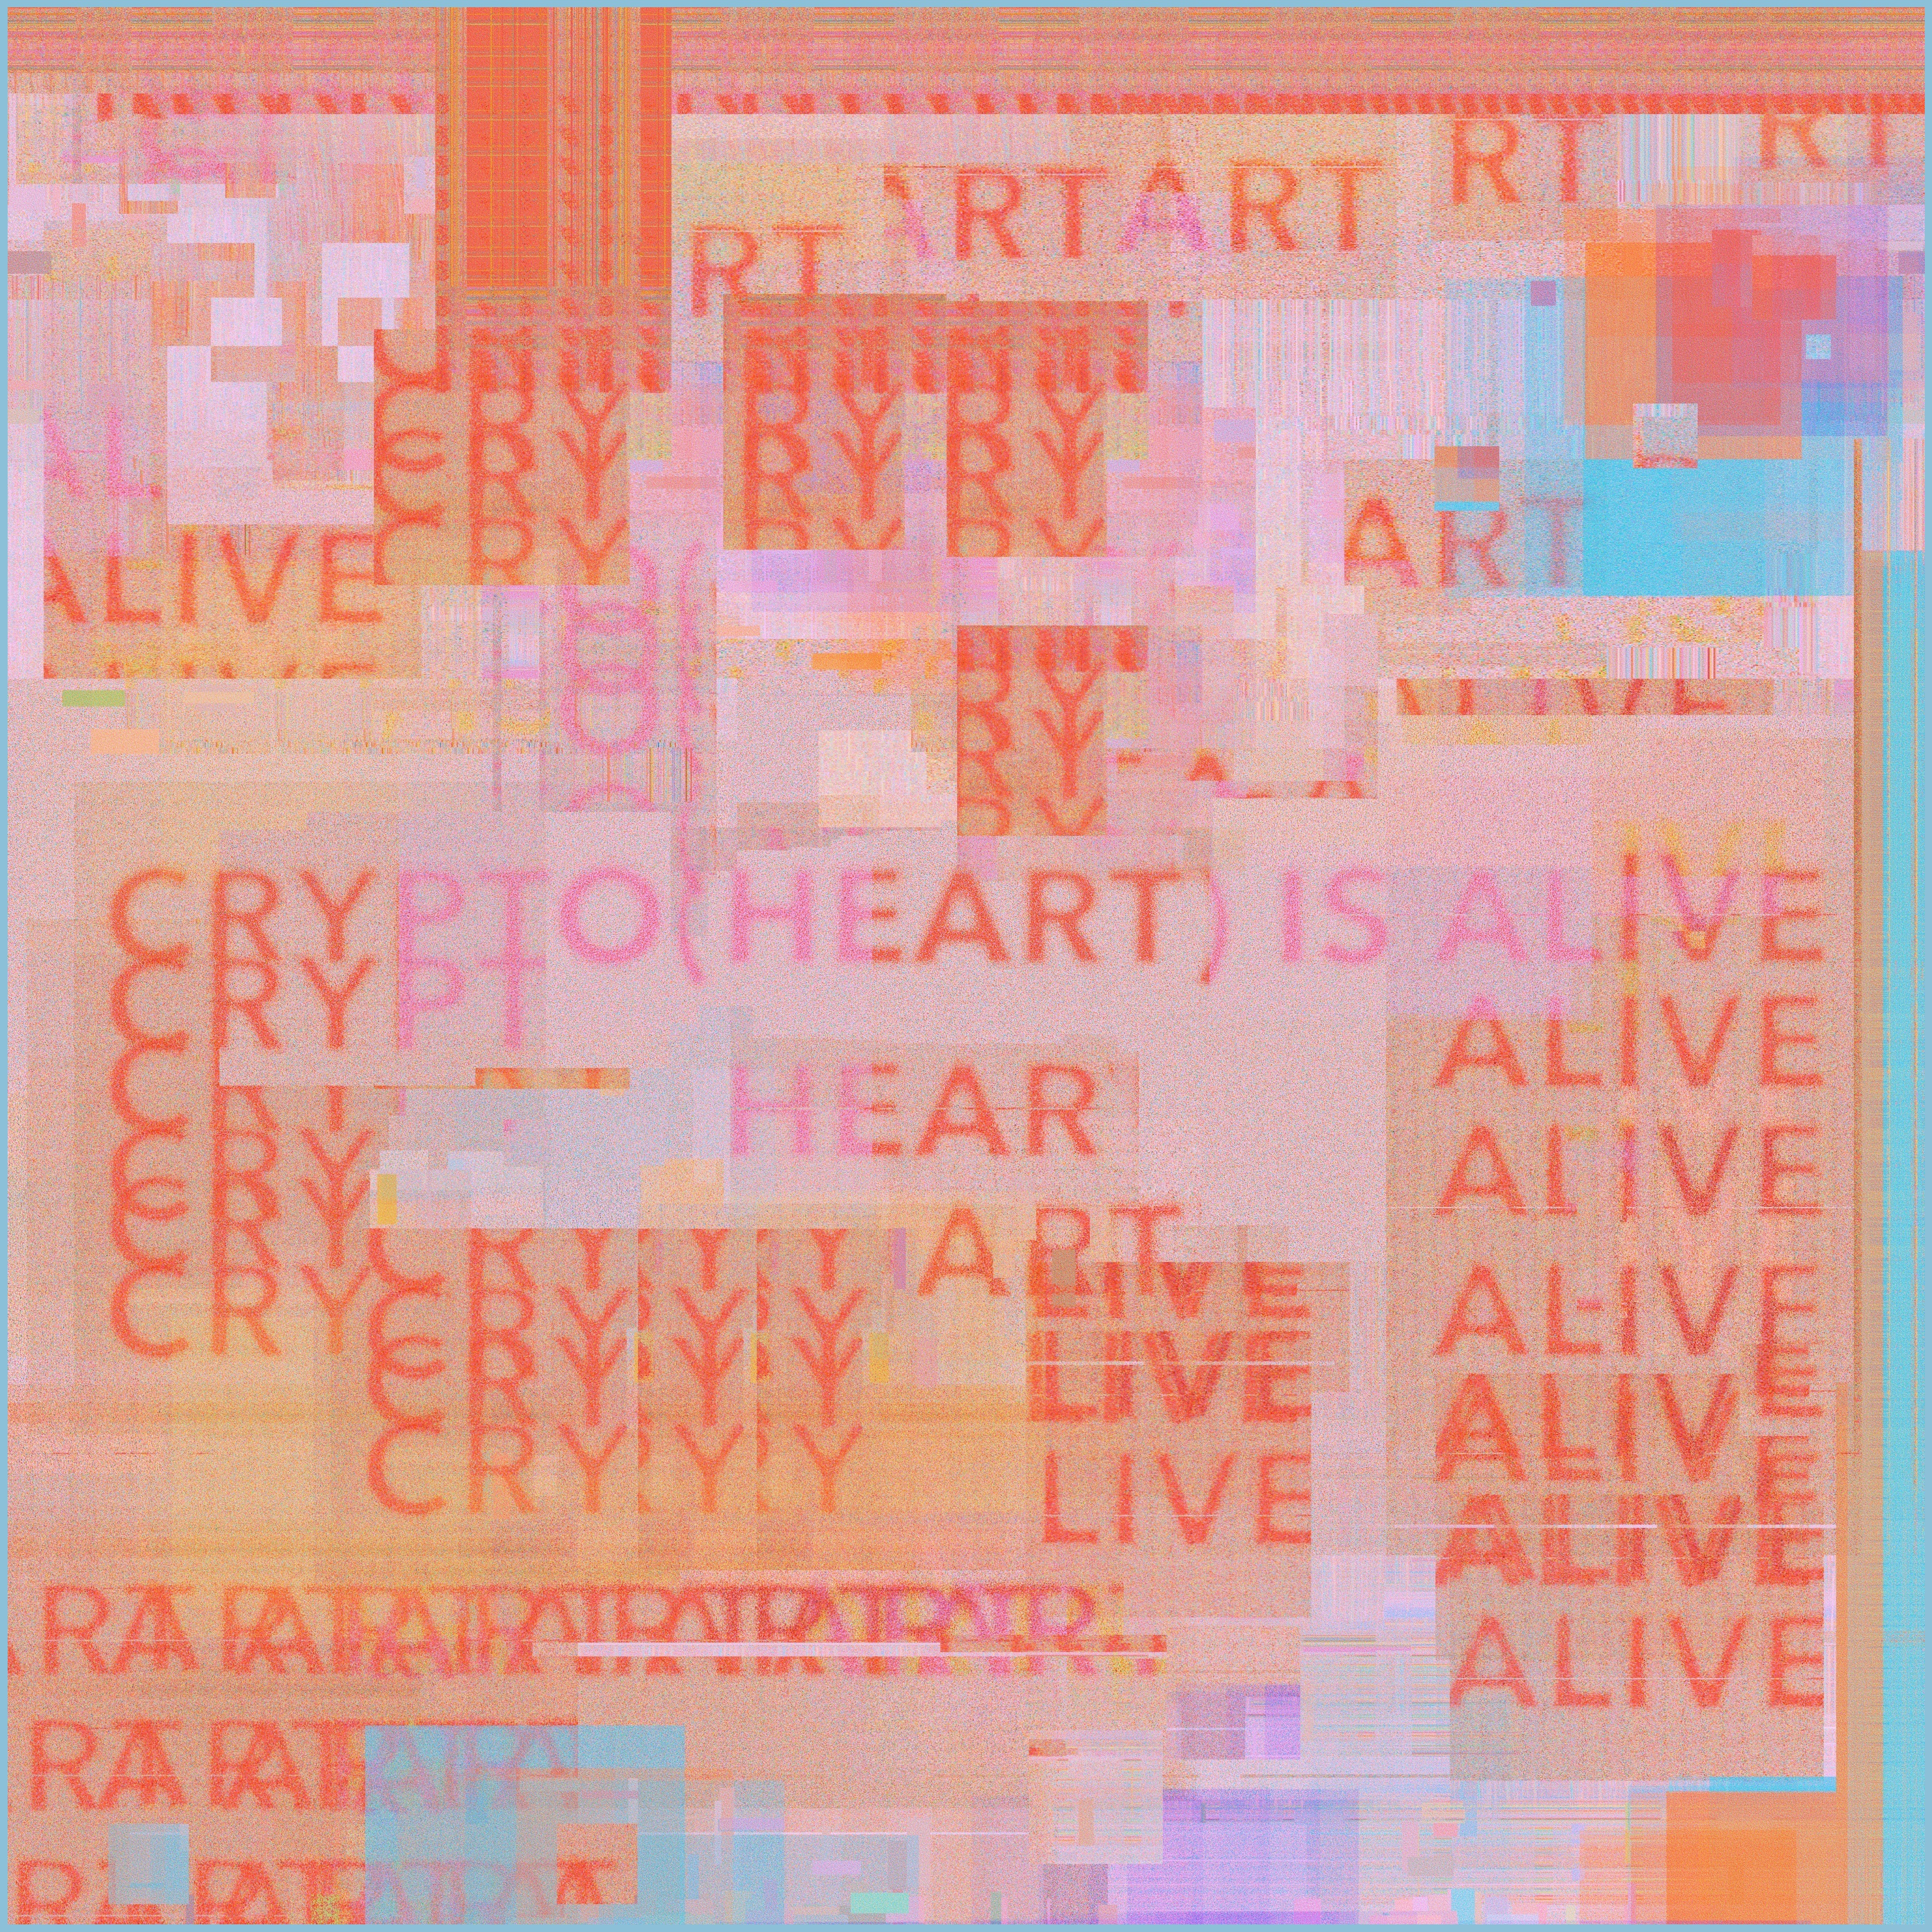 CRYPTO(HEART) IS ALIVE || theYRDGZ